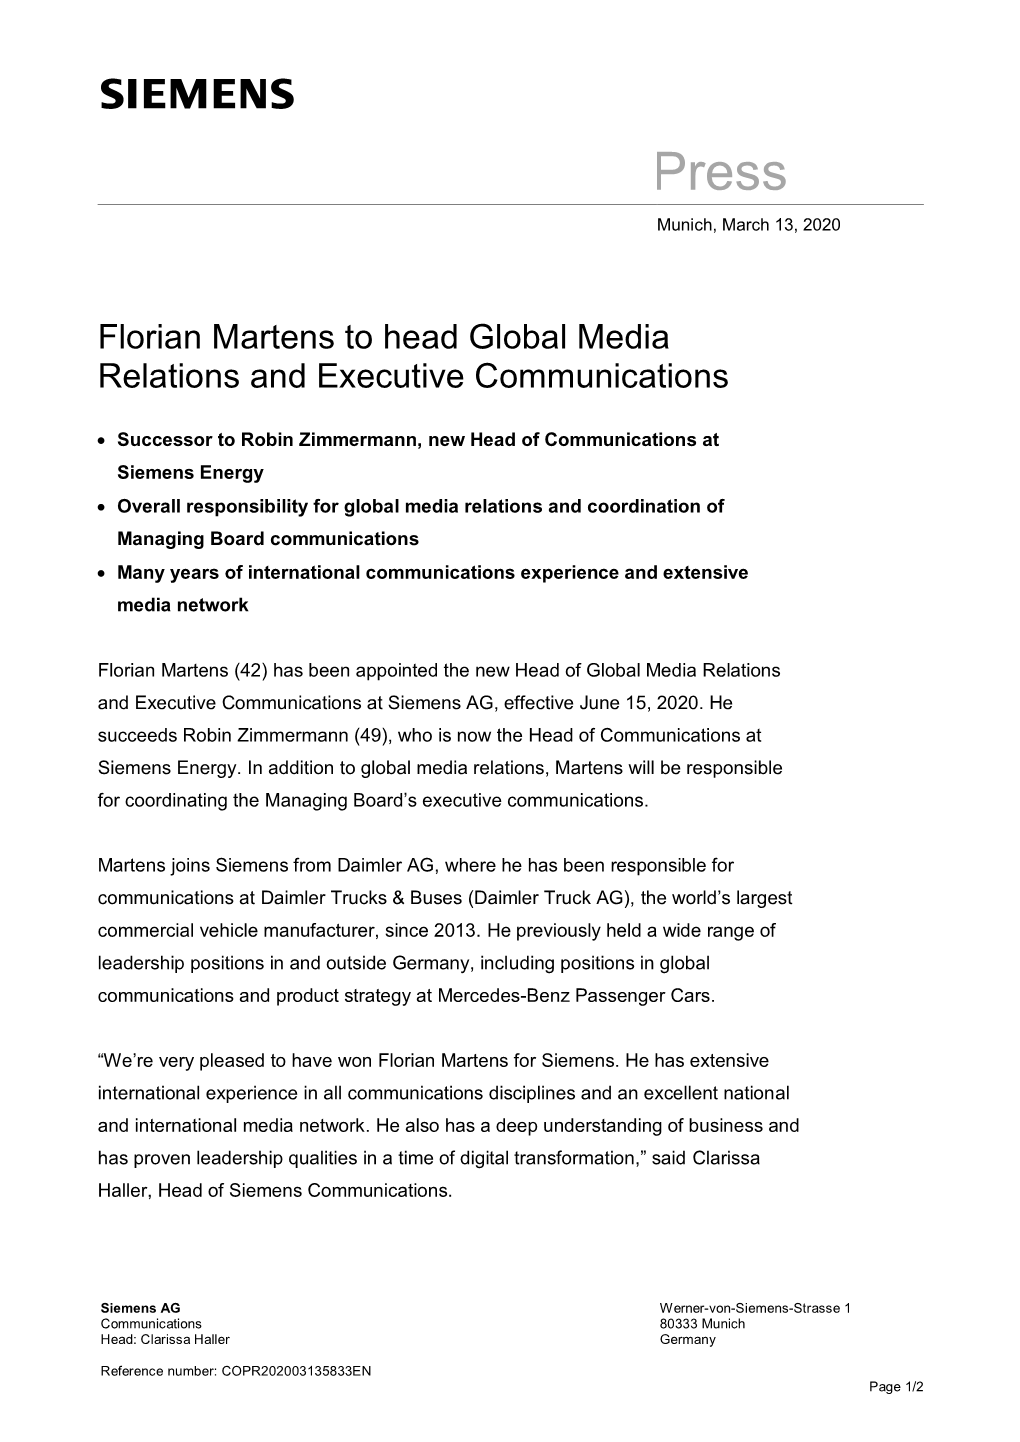 Florian Martens to Head Global Media Relations and Executive Communications